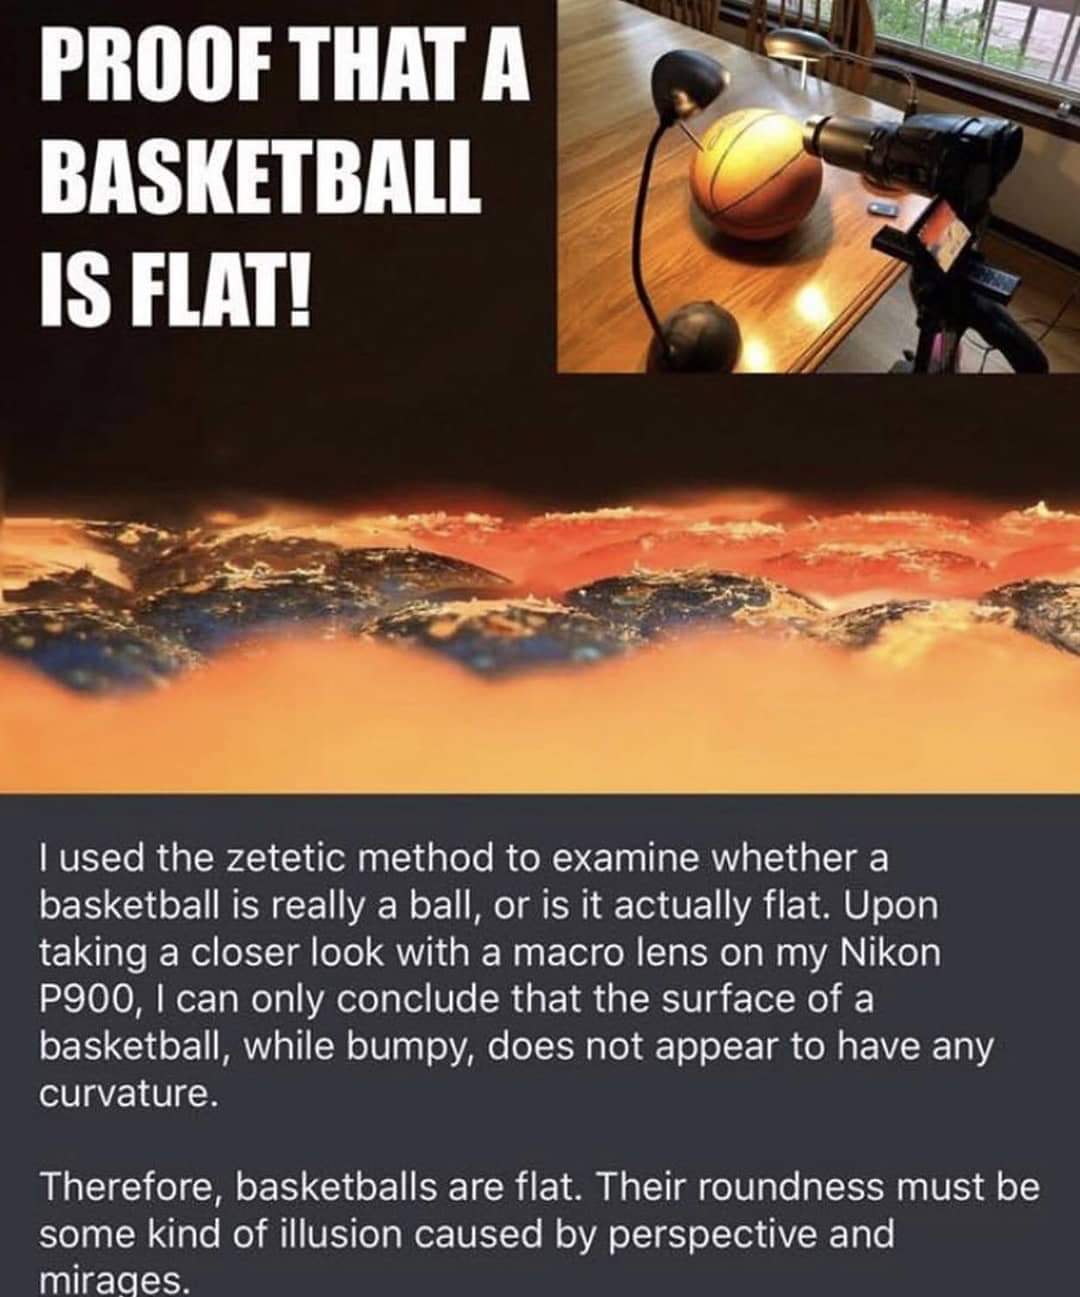 basketball is flat - Proof That A Basketball Is Flat! Tused the zetetic method to examine whether a basketball is really a ball, or is it actually flat. Upon taking a closer look with a macro lens on my Nikon P900, I can only conclude that the surface of 